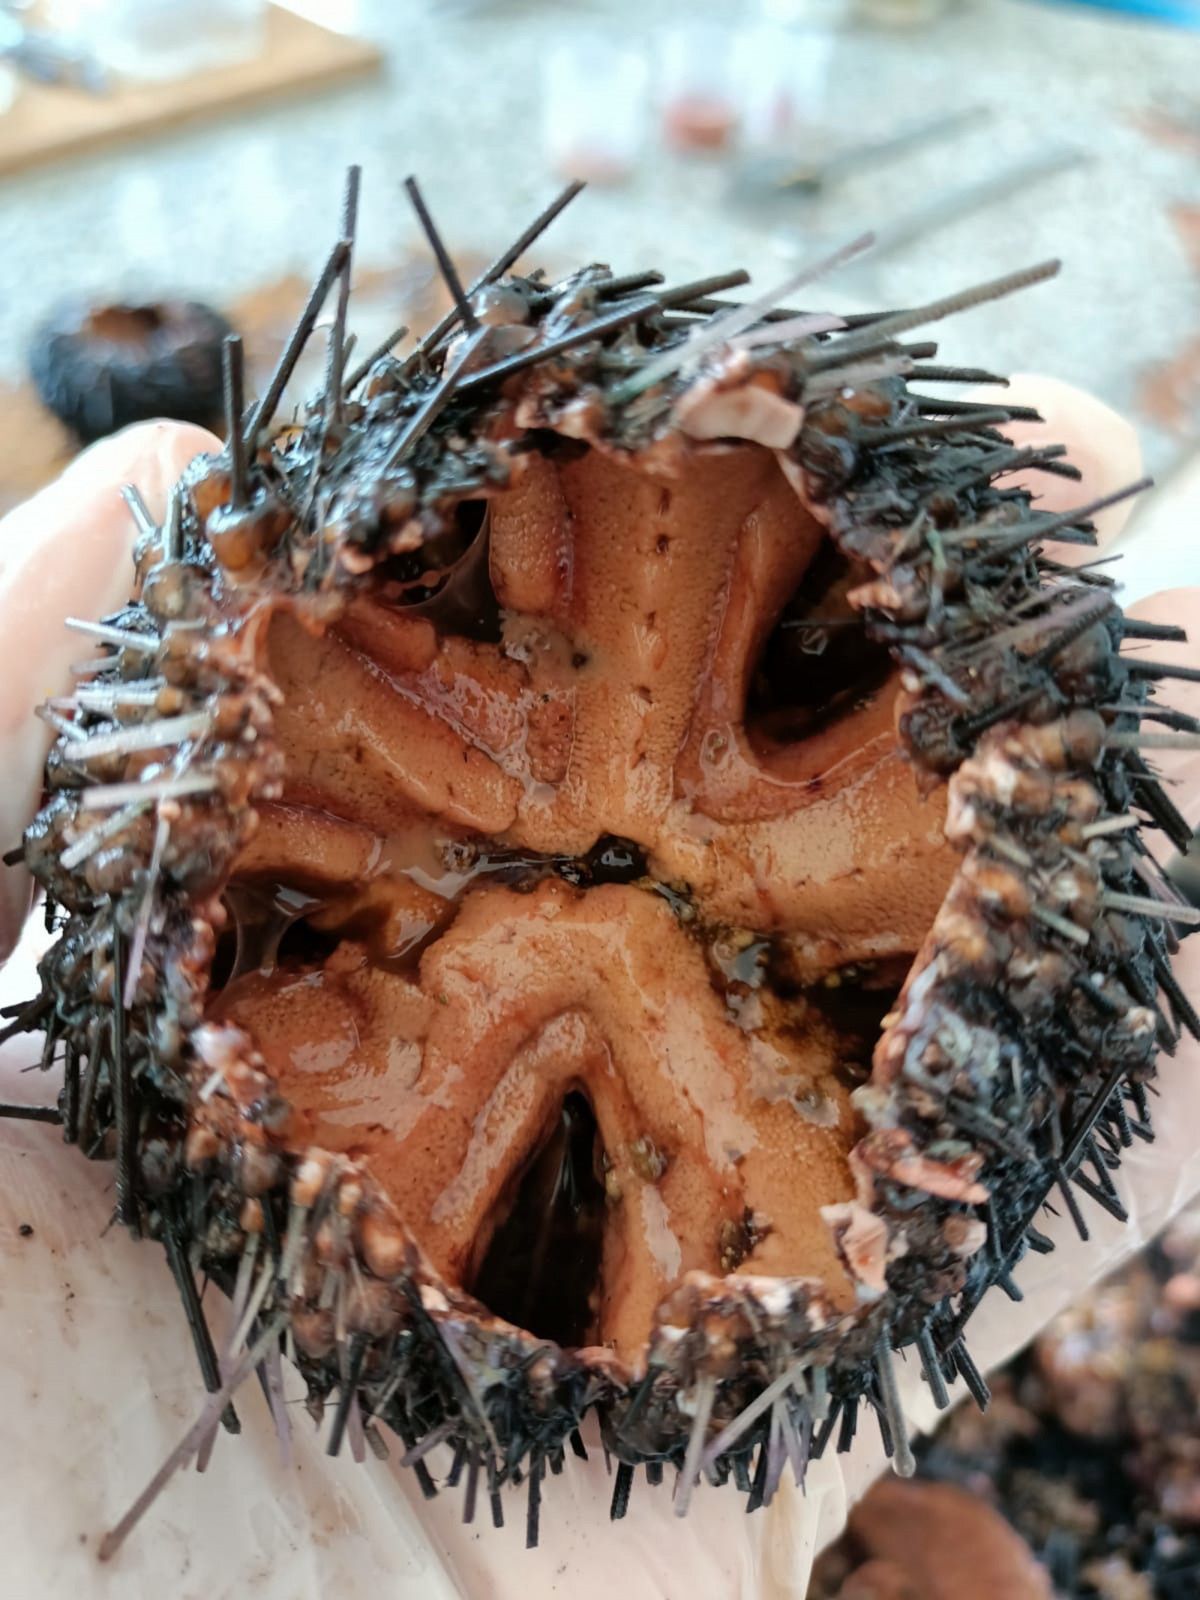 Toxic invasive sea urchins exported to Italy #4